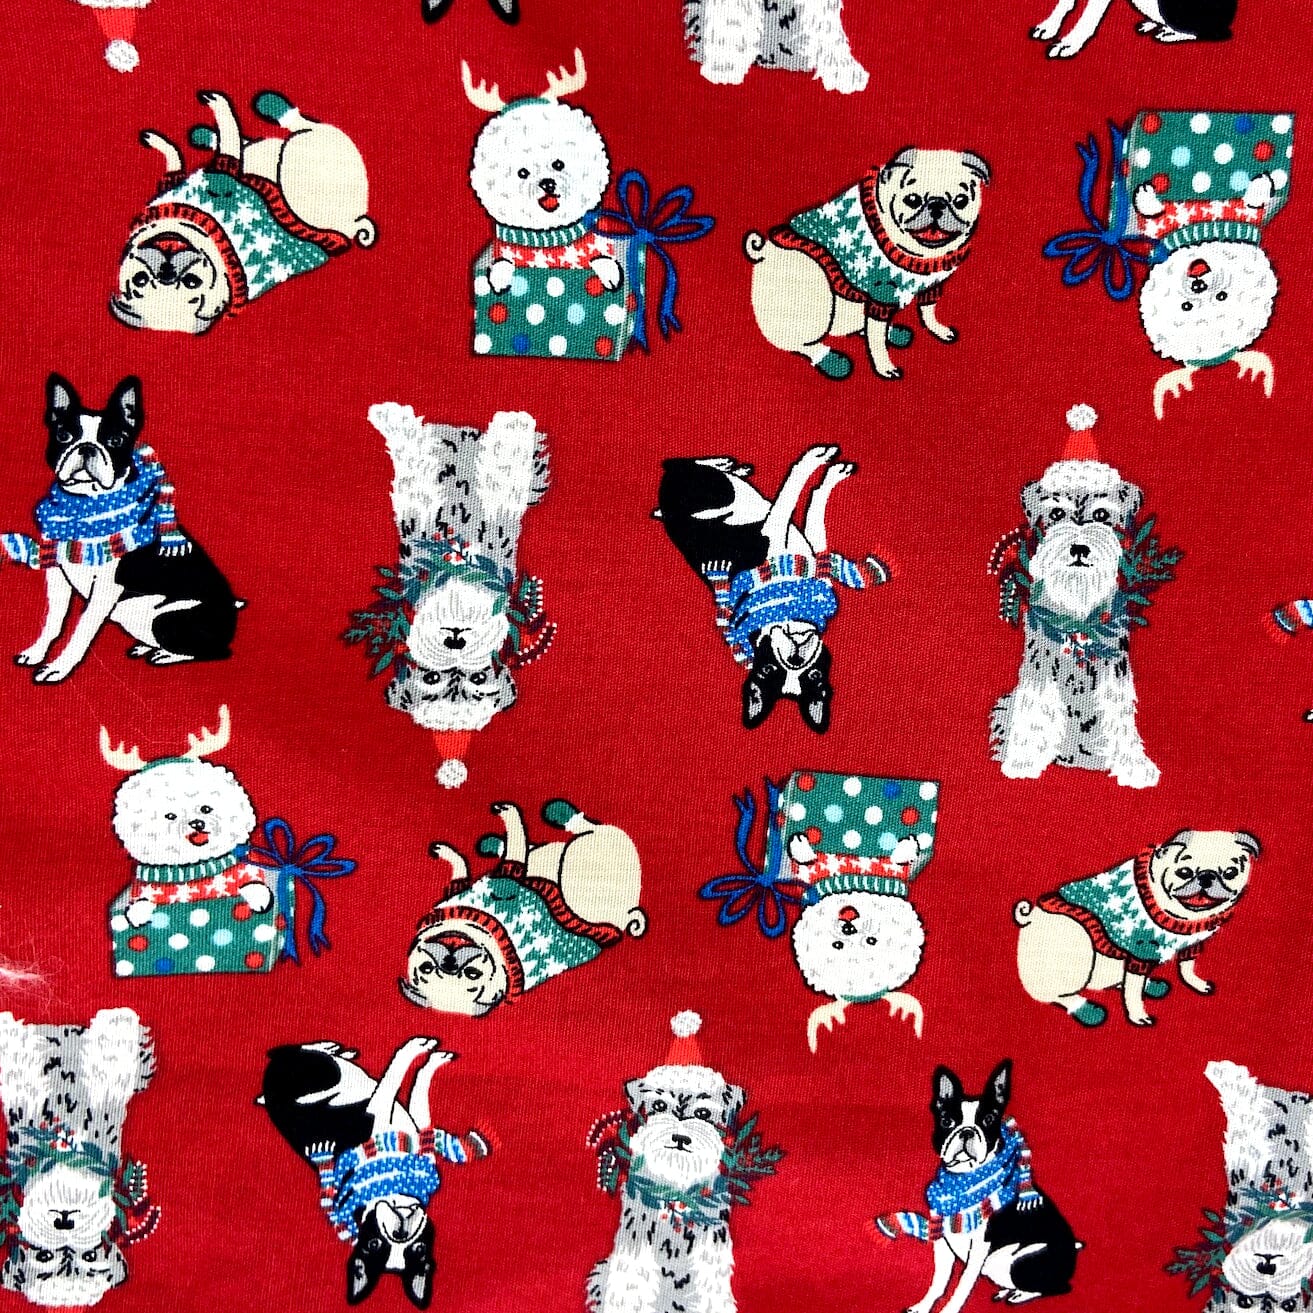 Fun Festive Christmas Puppy Dog Patterned Cotton Boxer Shorts for Men